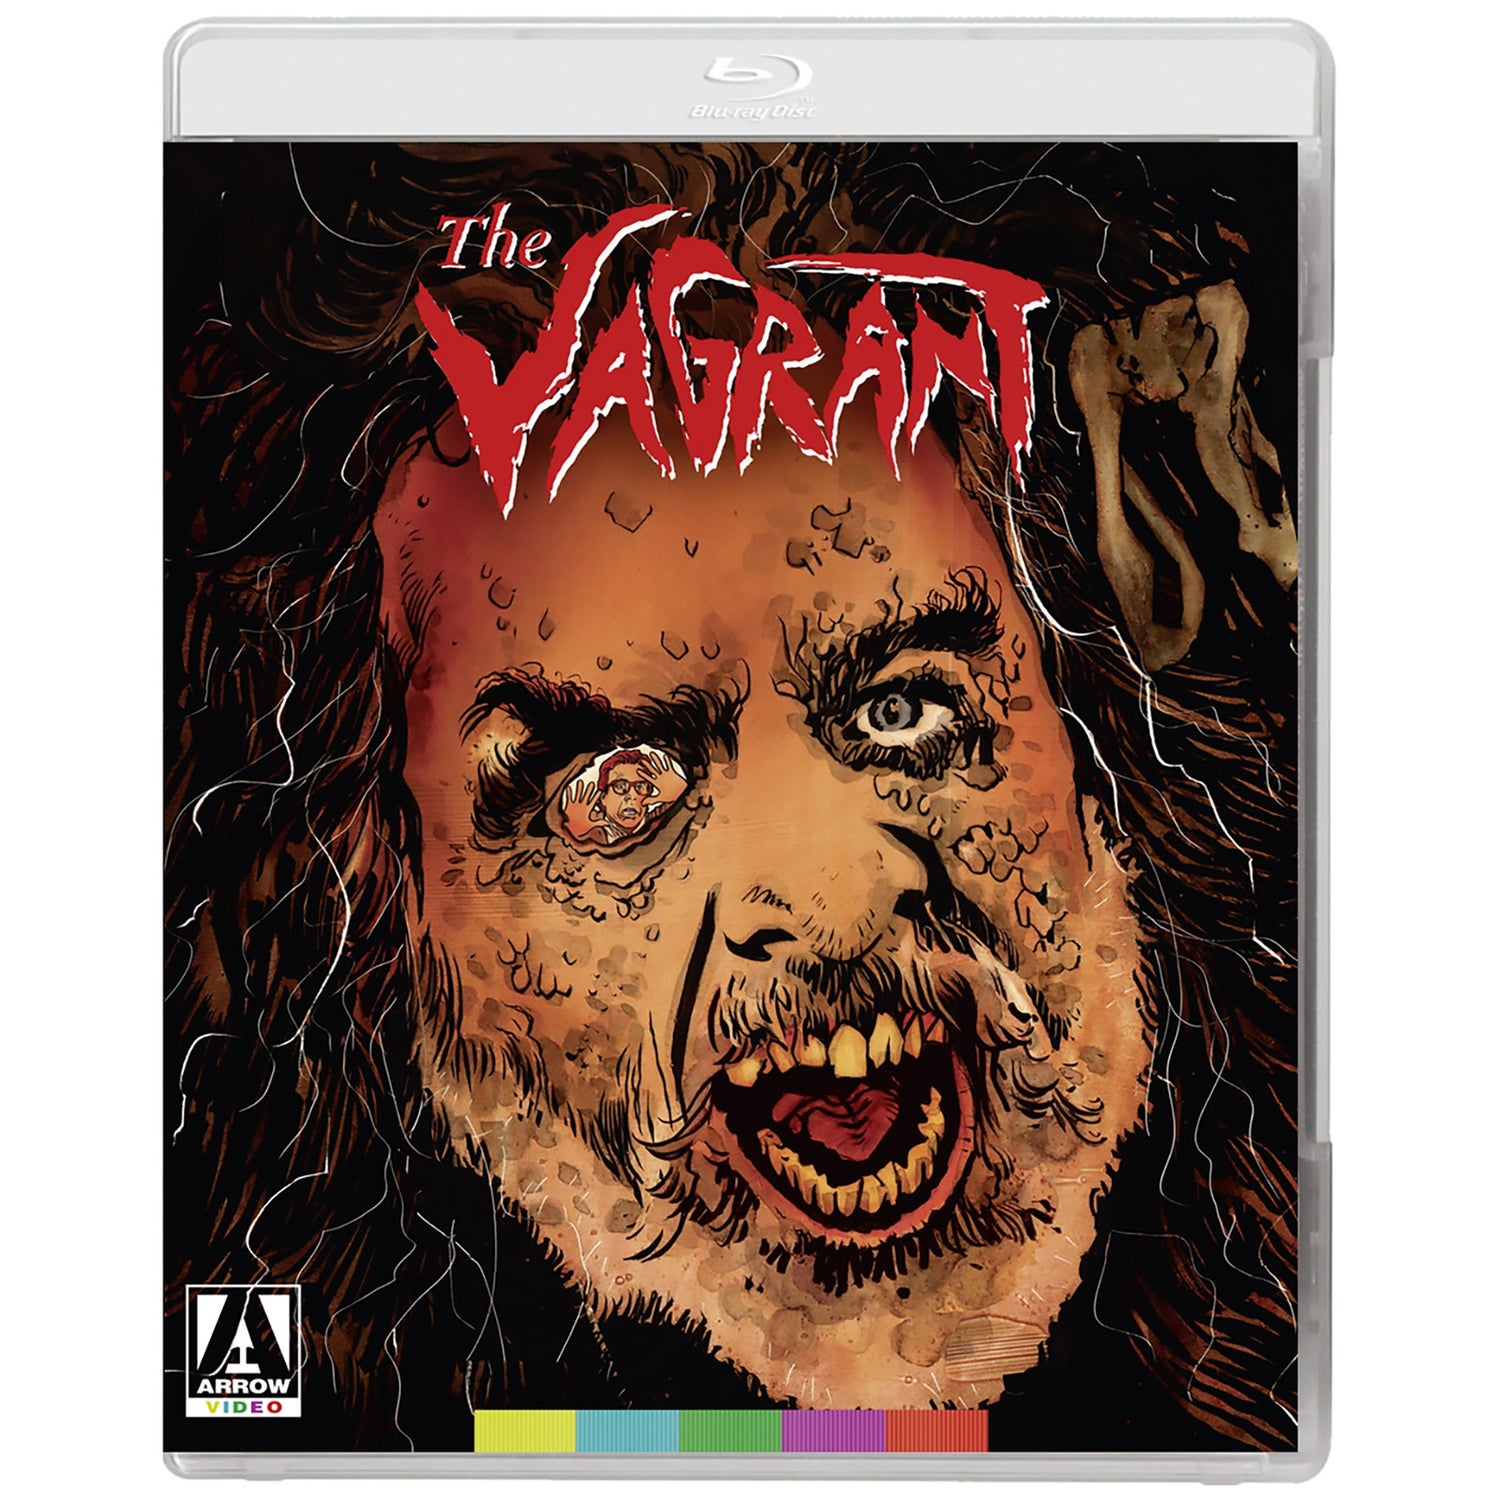 The Vagrant Blu-ray